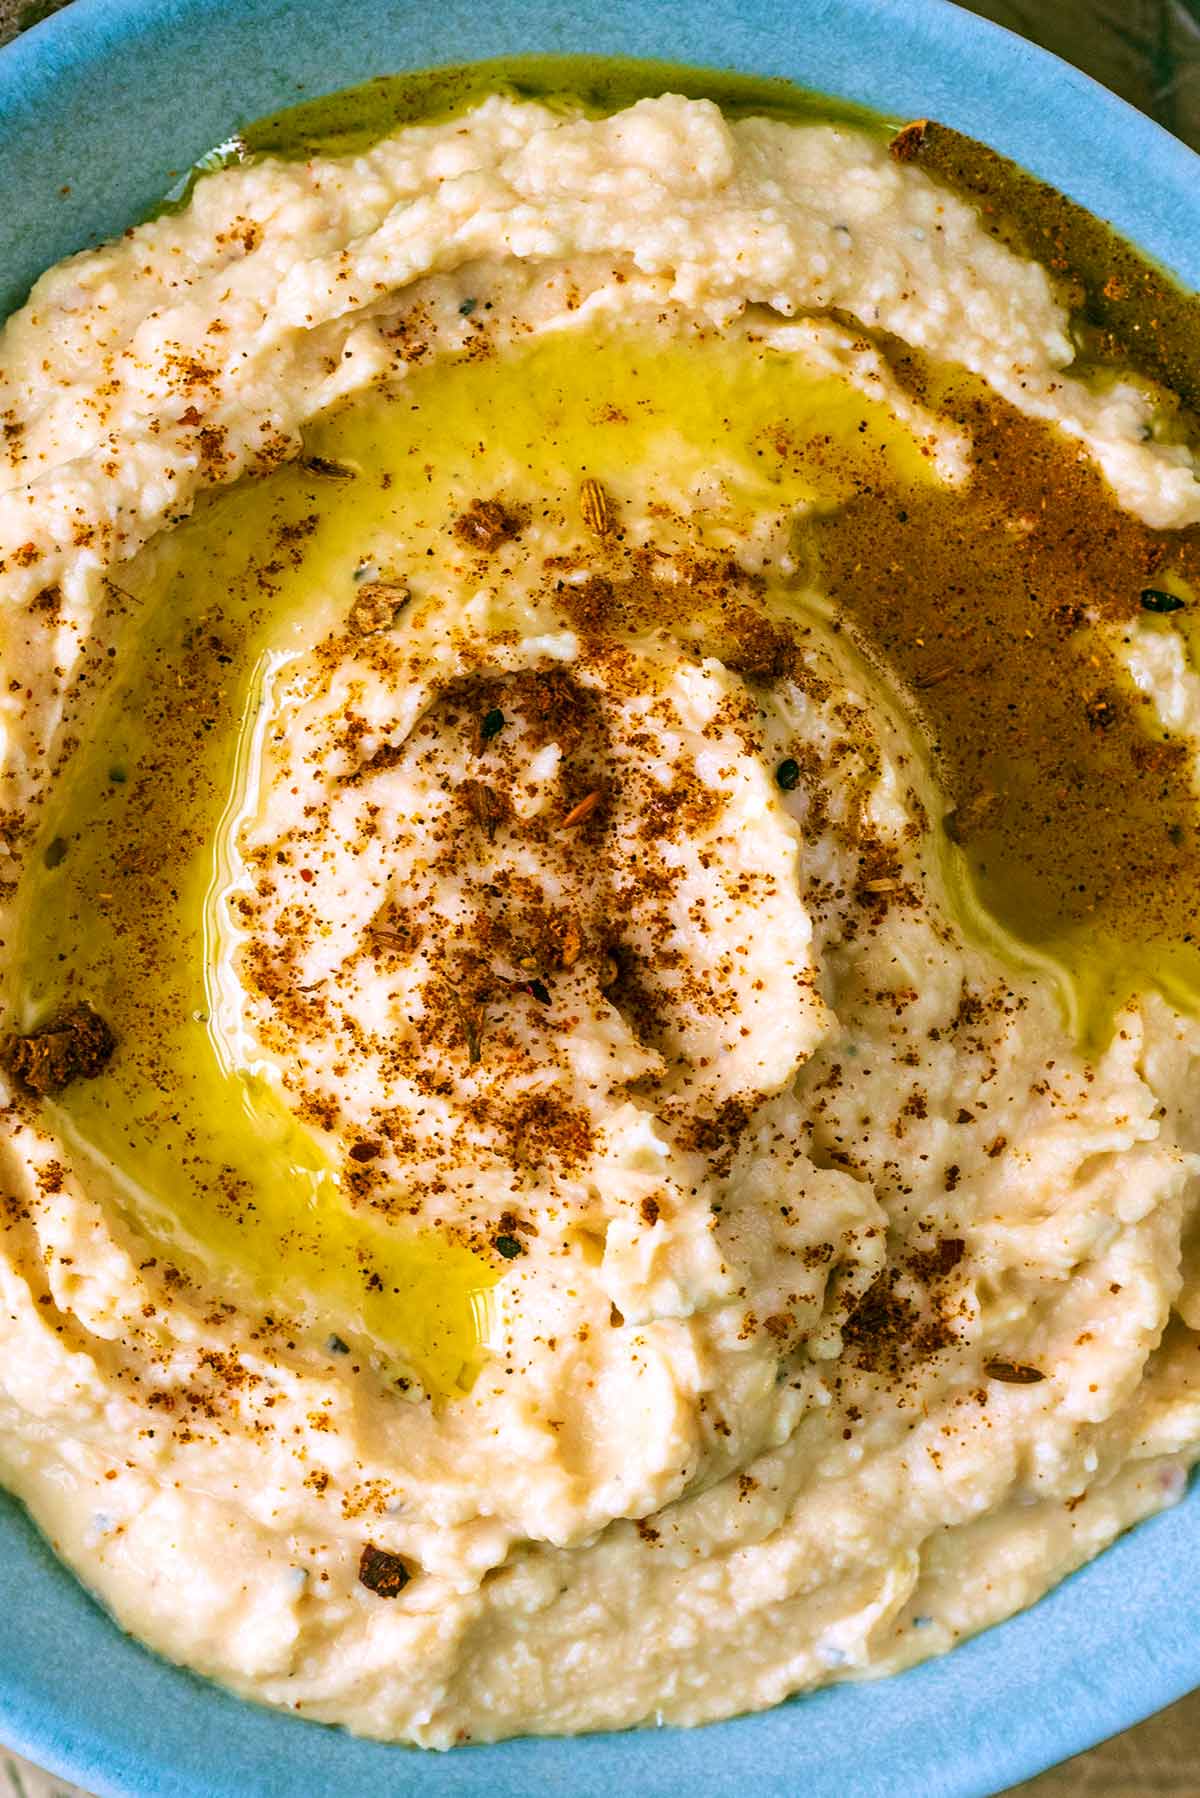 Hummus topped with oil and a sprinkling of ras el hanout.